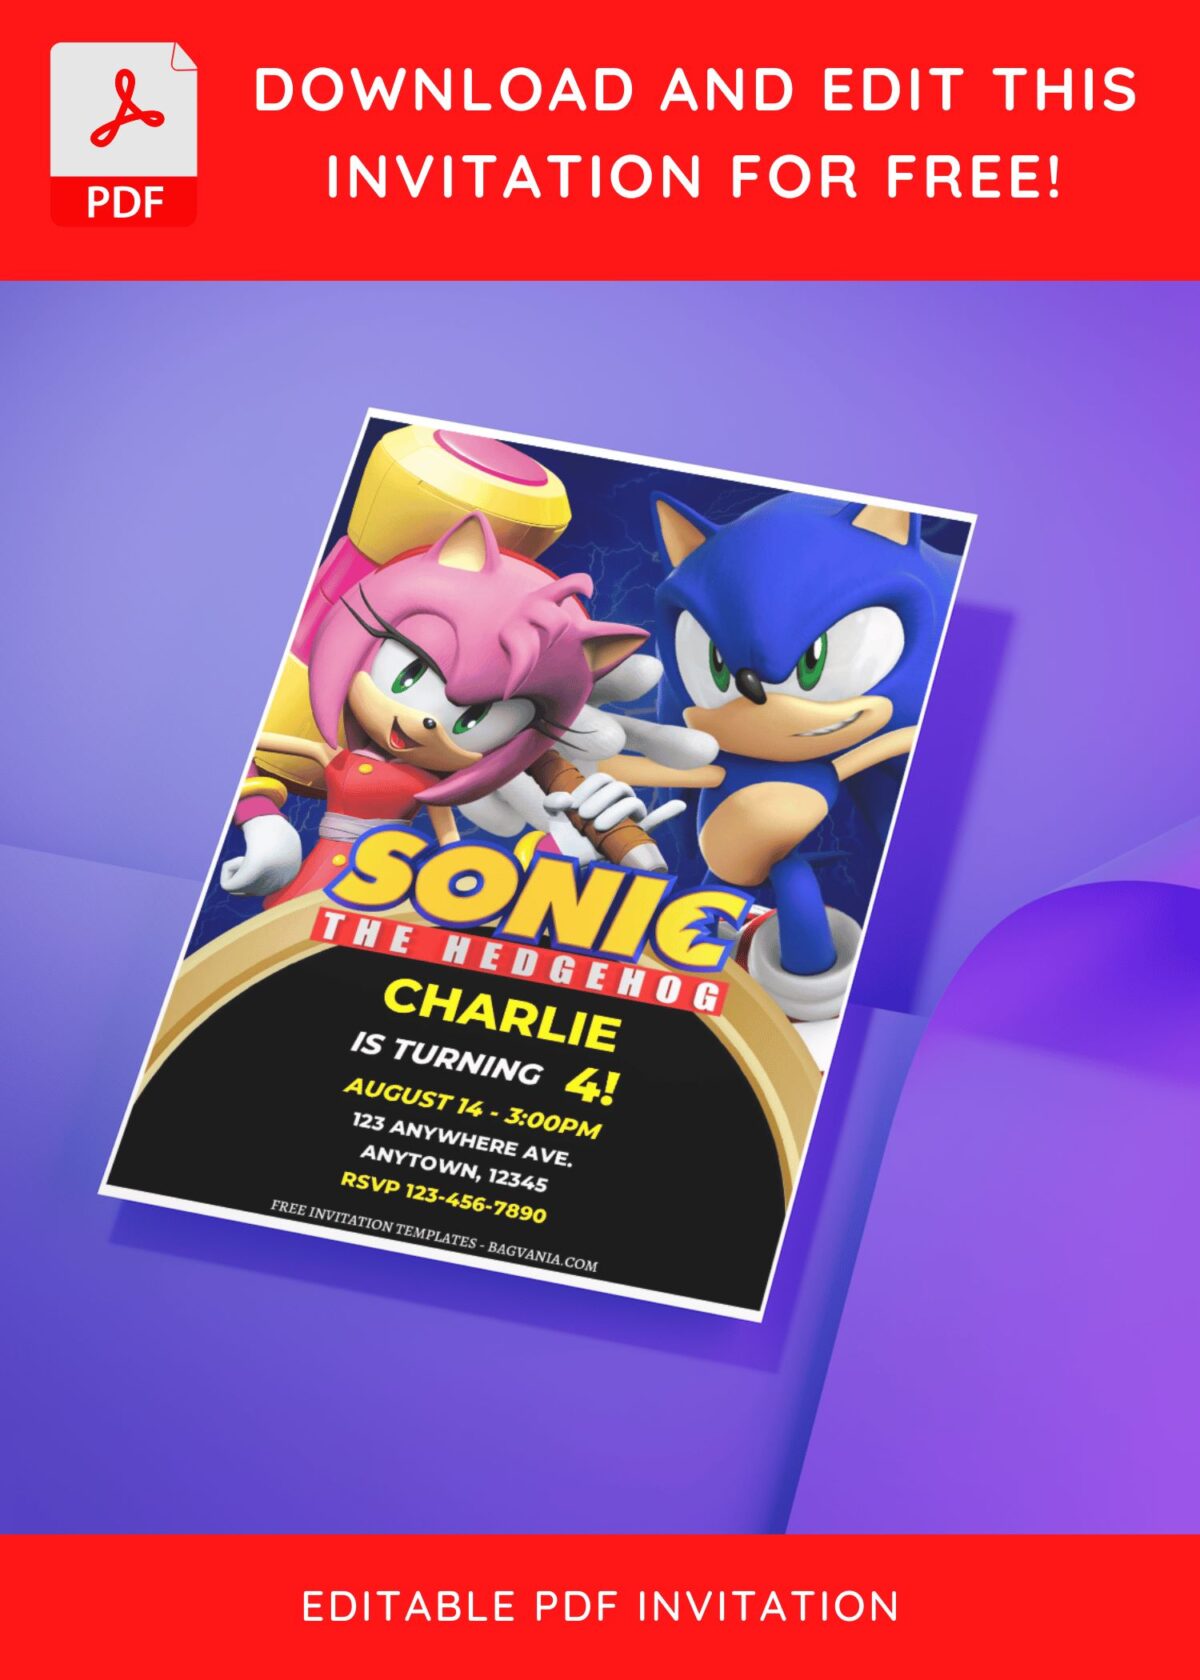 (Free Editable PDF) Blast From The Past Sonic Birthday Invitation Templates with editable text